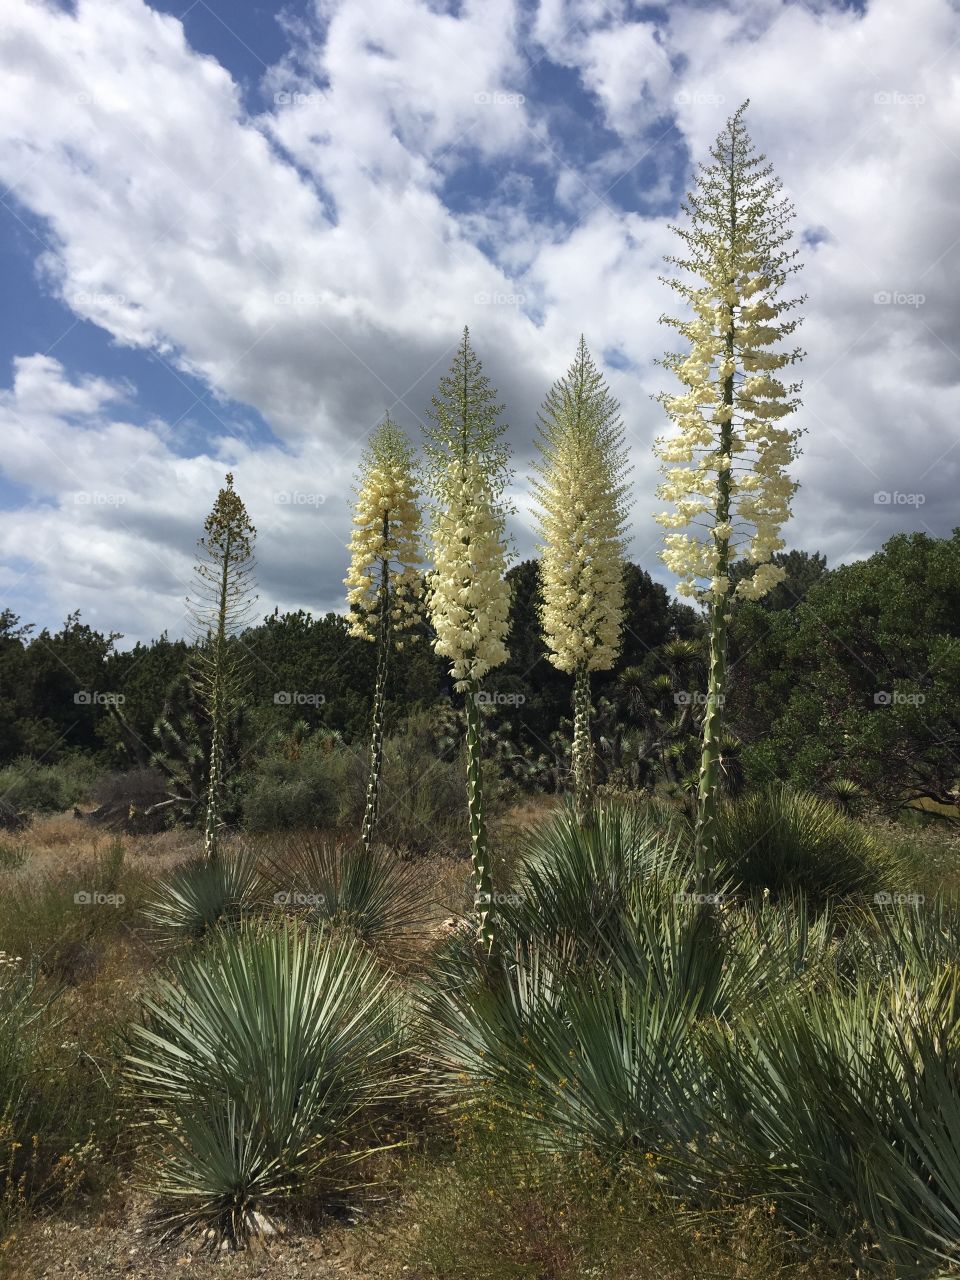 Yuccas in Spring
